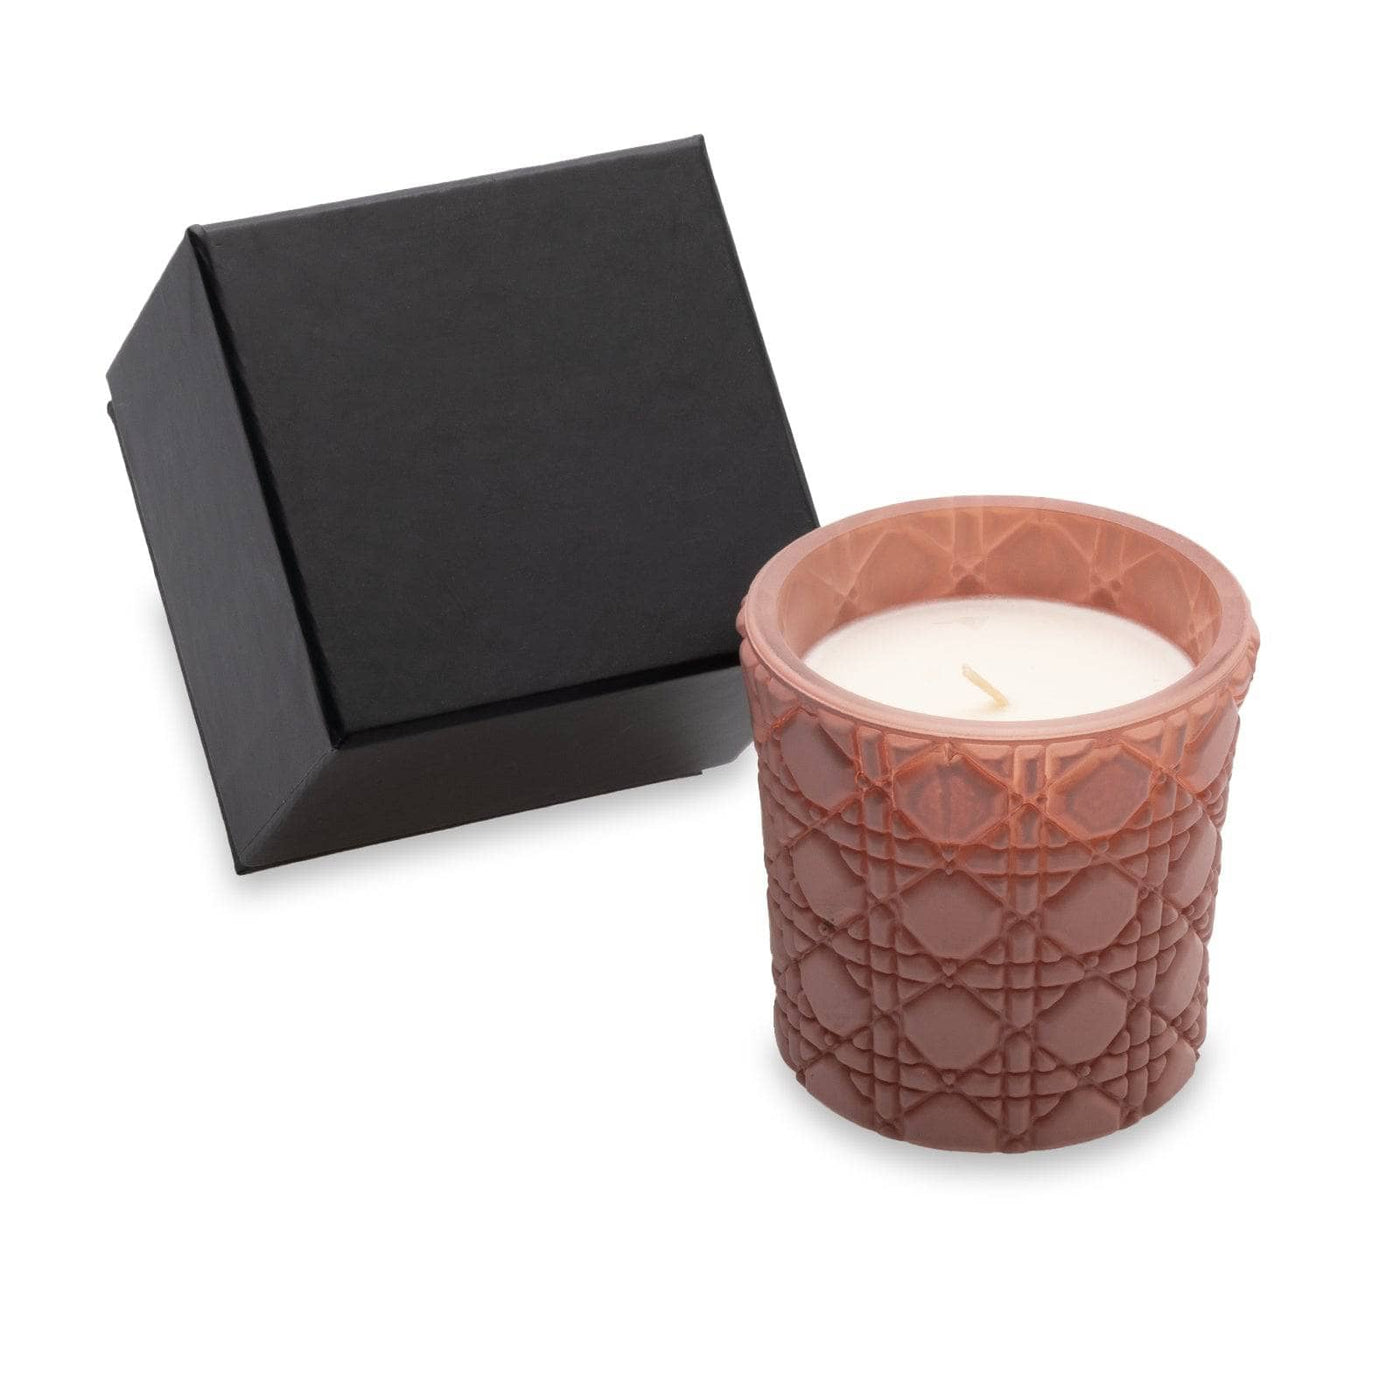 Re-energise Circular Soy Wax Candle, Pink, 145 g Candles sazy.com